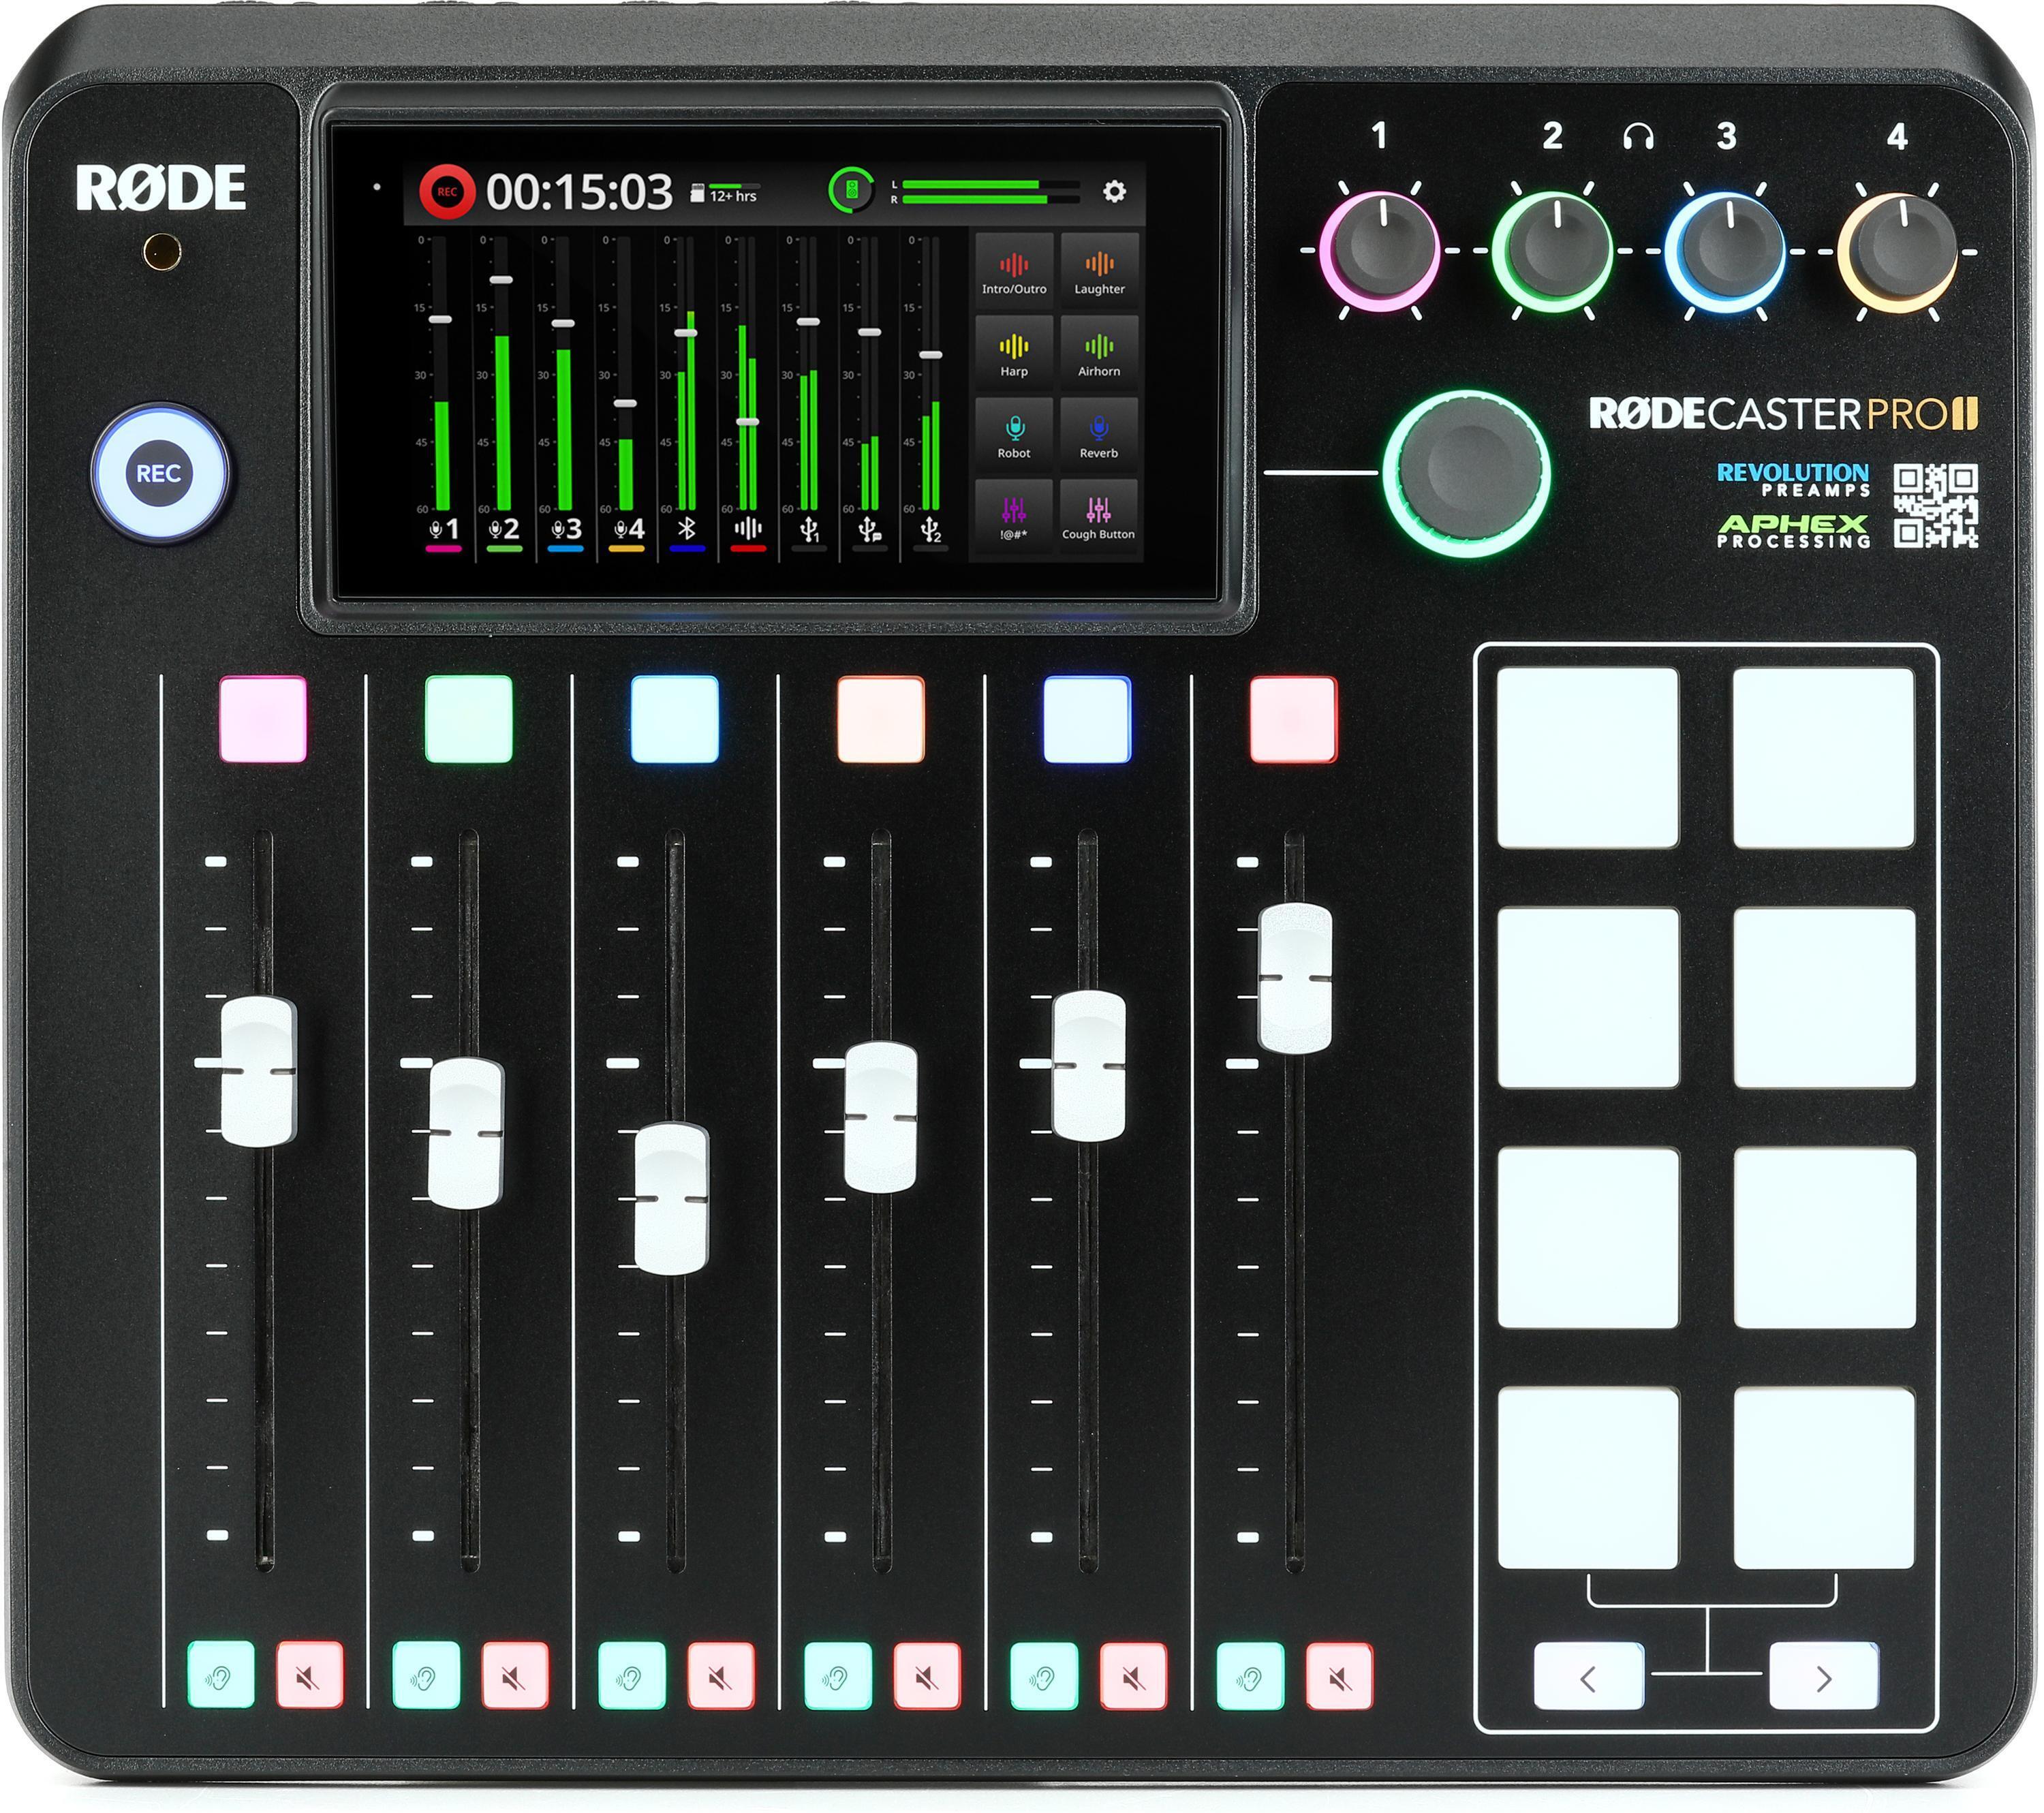 Introducing The RØDECaster Pro II - The World's Most Powerful All-in-one  Audio Solution For Content Creators